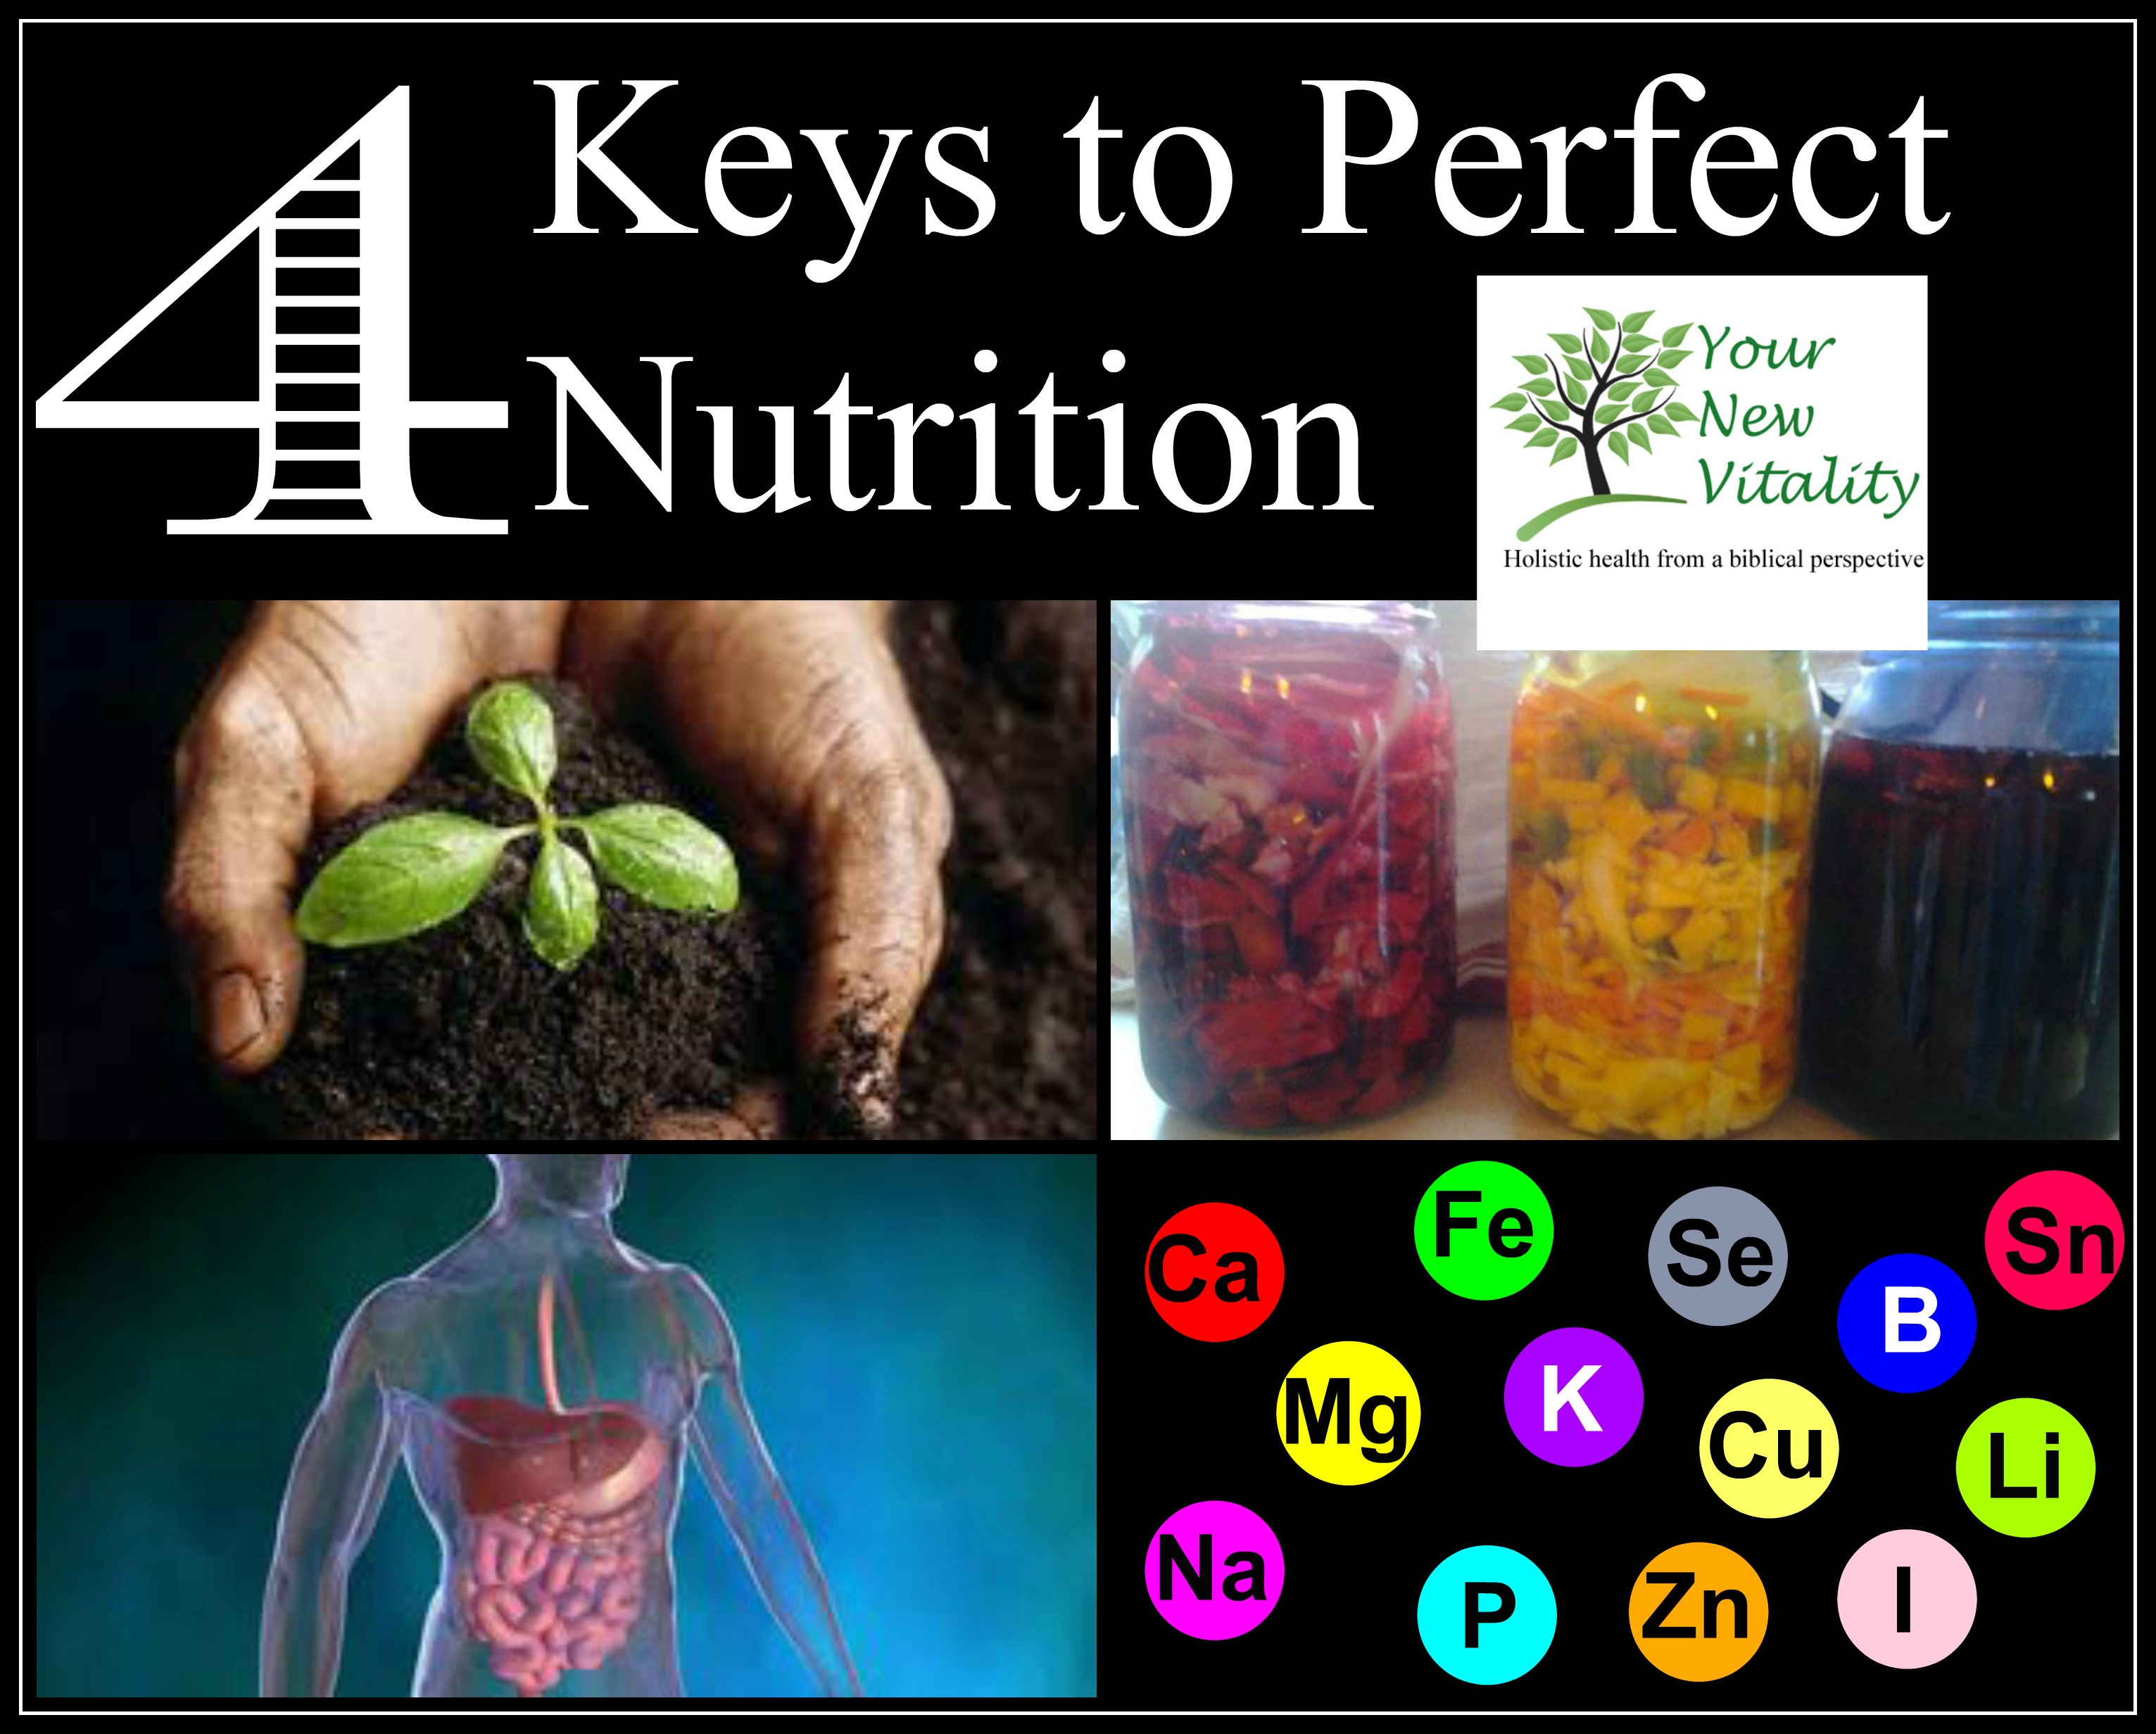 4 Keys to Perfect Nutrition1